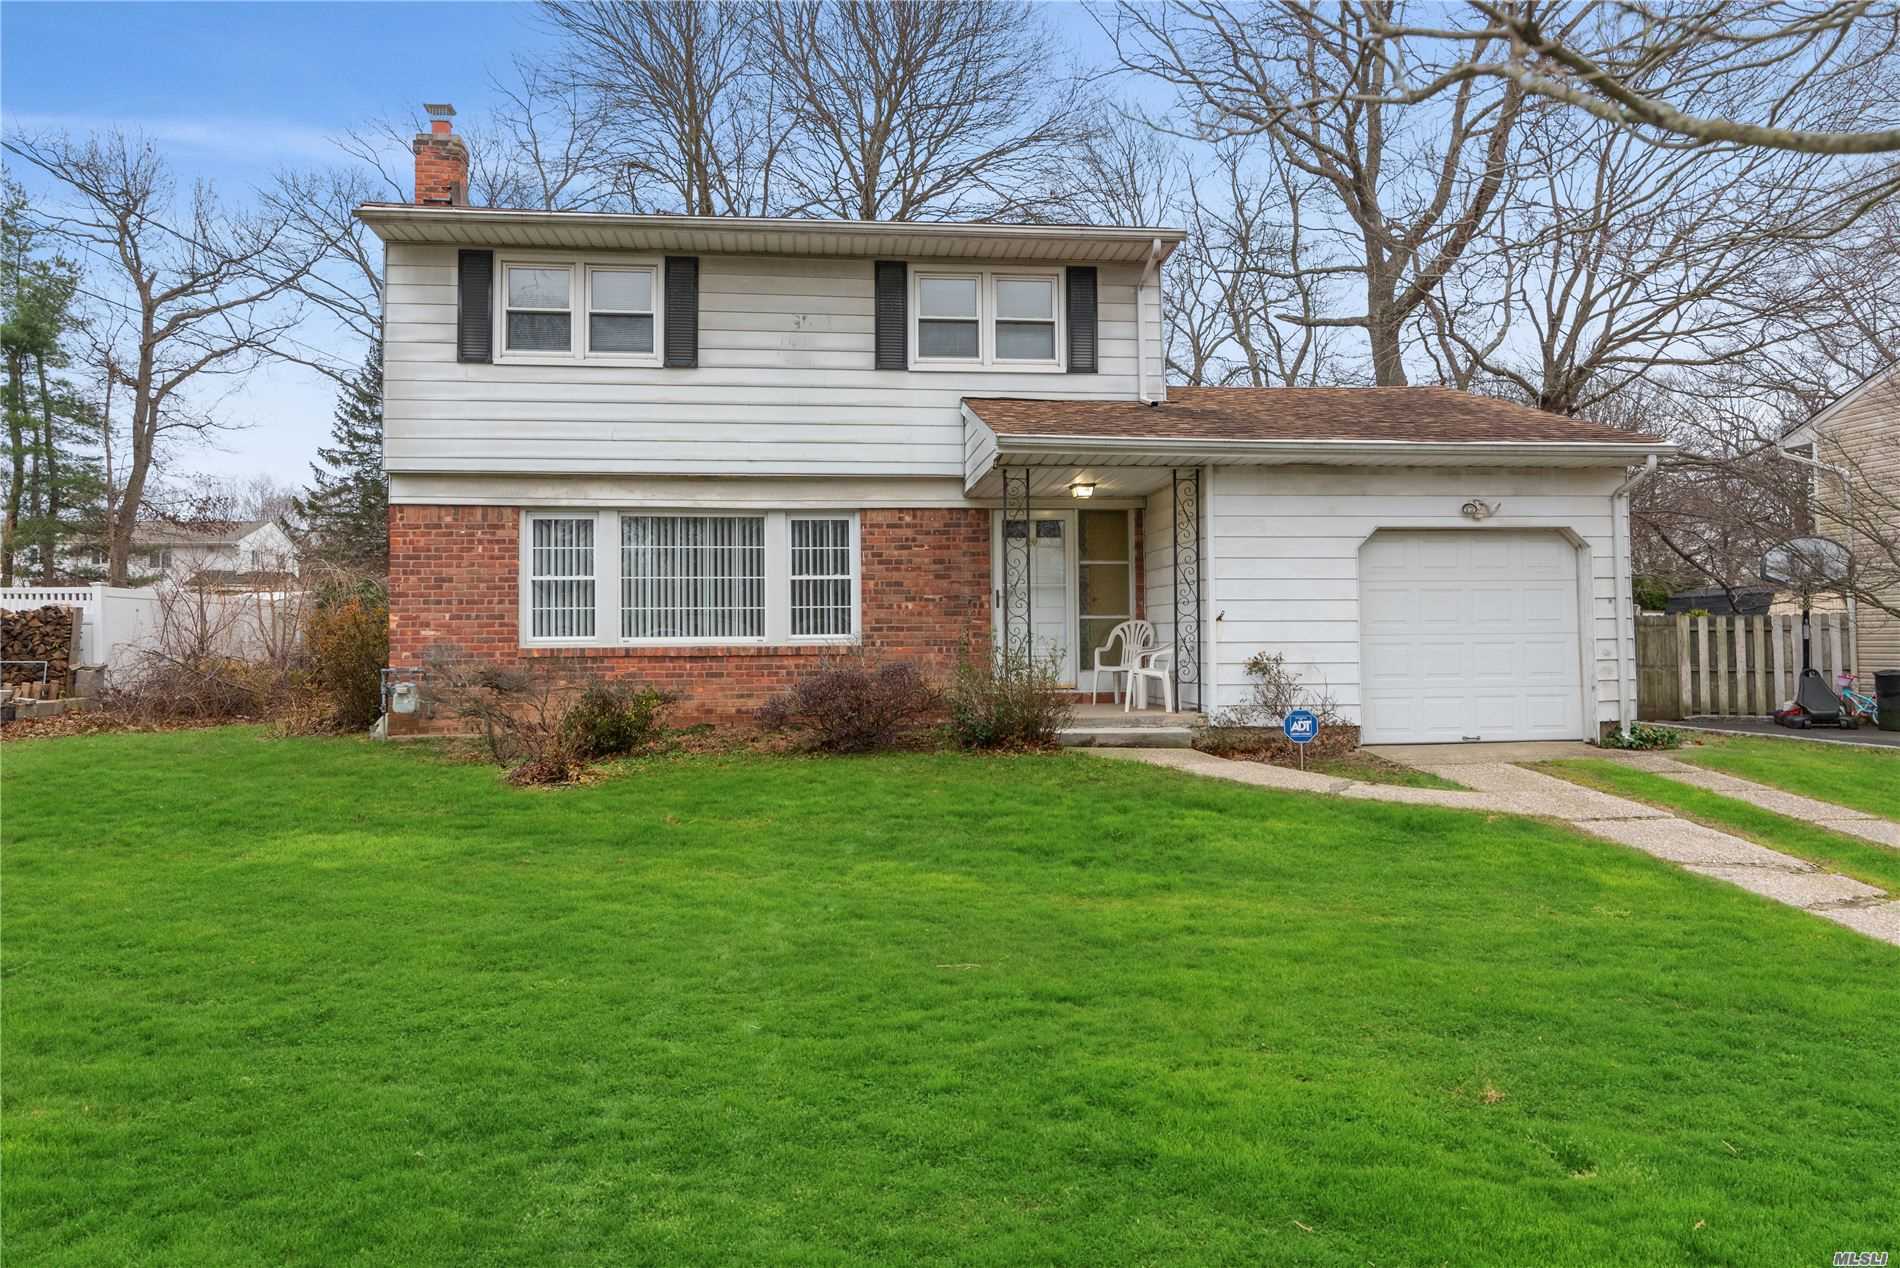 Hauppauge Colonial With 3 Bedrooms, 1.5 Bathrooms and 1 Car garage. Living Room & Dining Room. Eat-in Kitchen with Den. Wood Floors. Gas Heat & Cooking. Full Basement. 75X150=11, 250SF Lot. Large Backyard. Low Taxes! Great Mid-block Location!